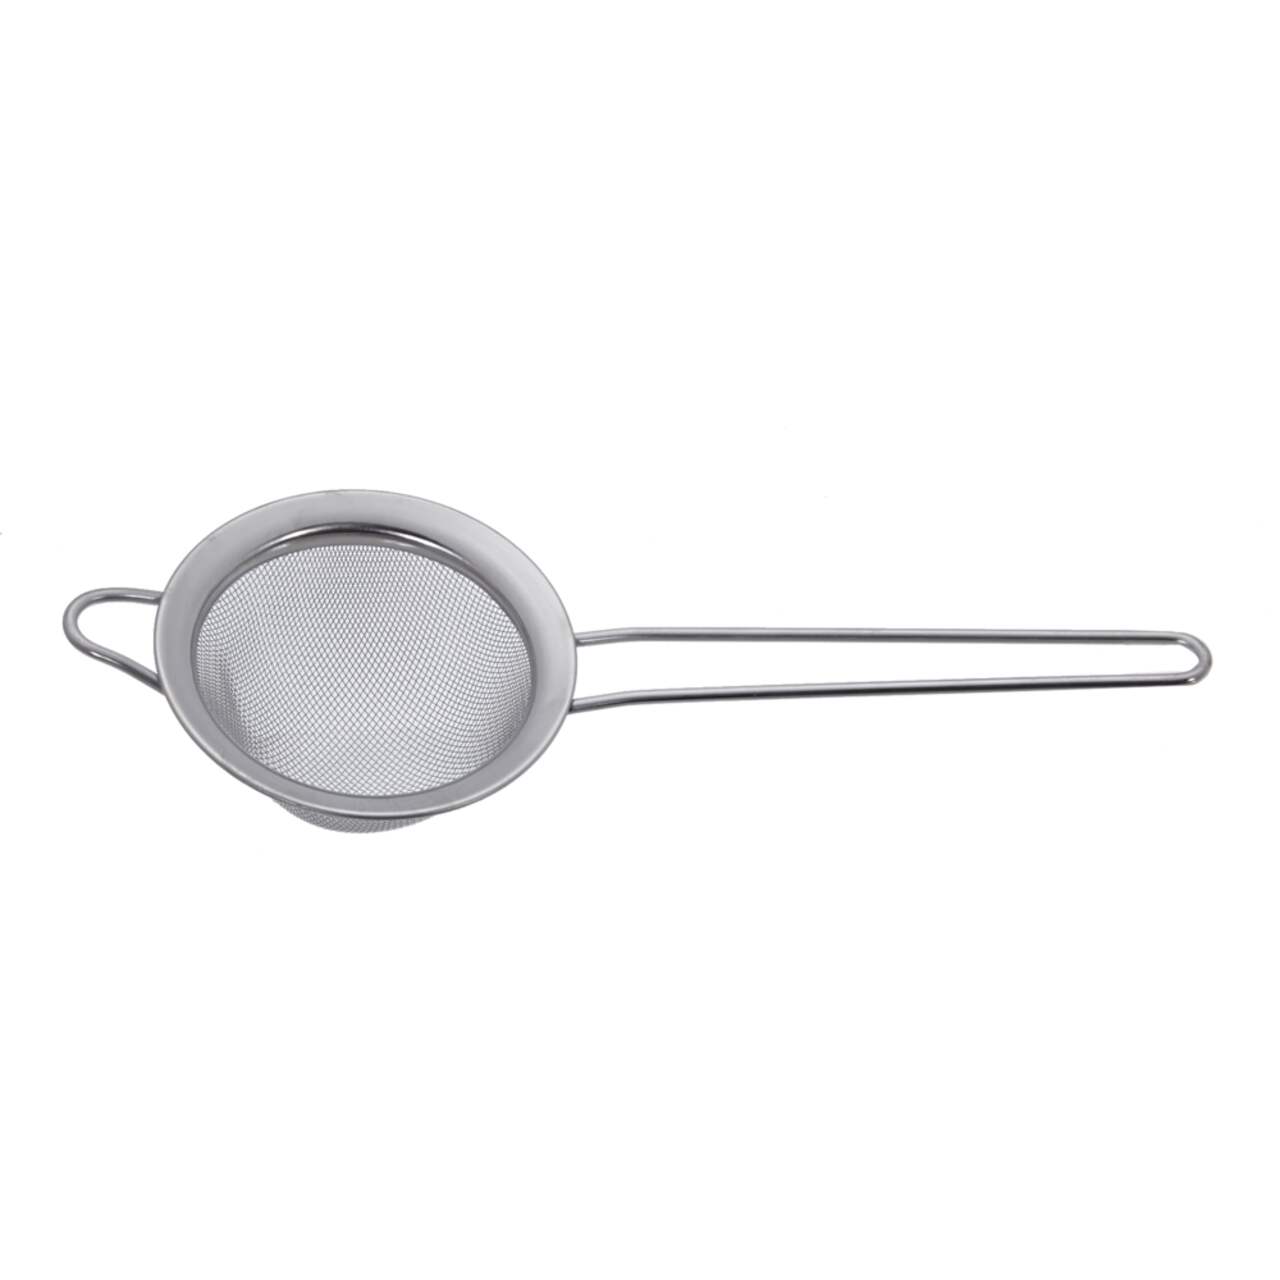 Stainless Steel Long-Handle Strainer, 2-3/4-in